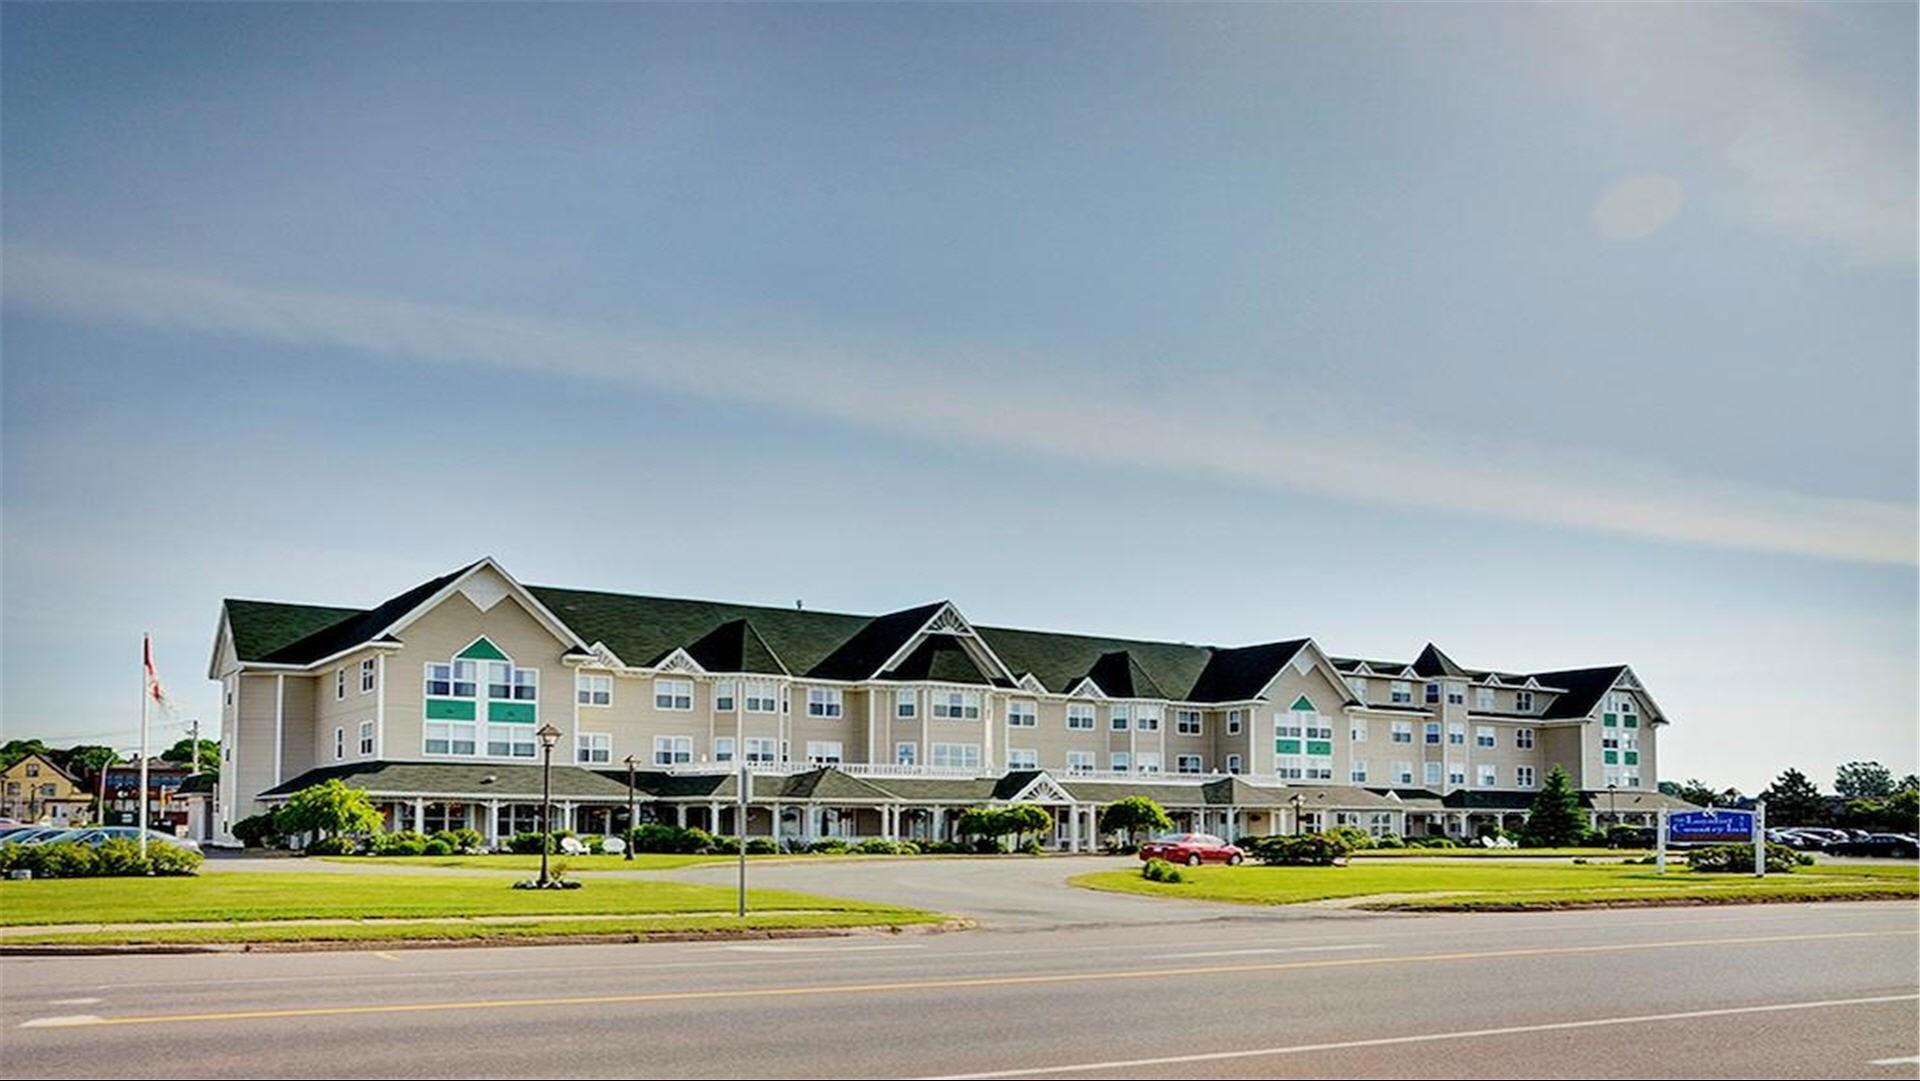 Loyalist Country Inn & Conference Center in Summerside, PE